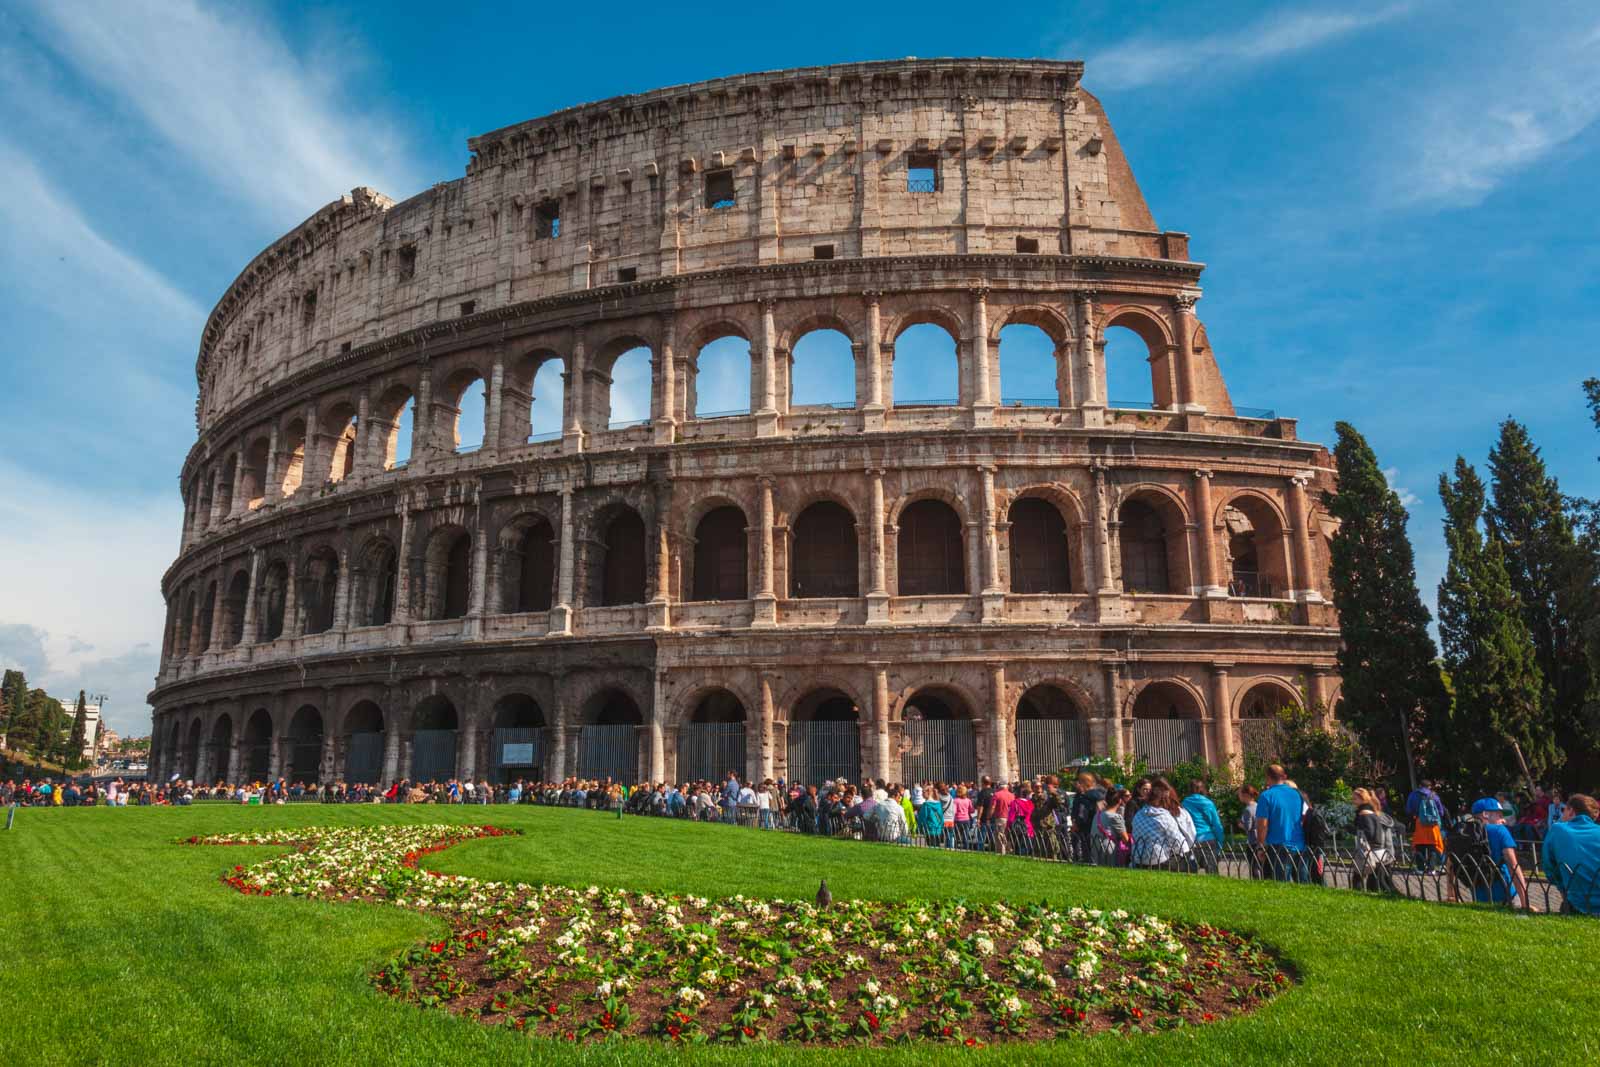 Best Day Trips from Florence The Colosseum, Rome